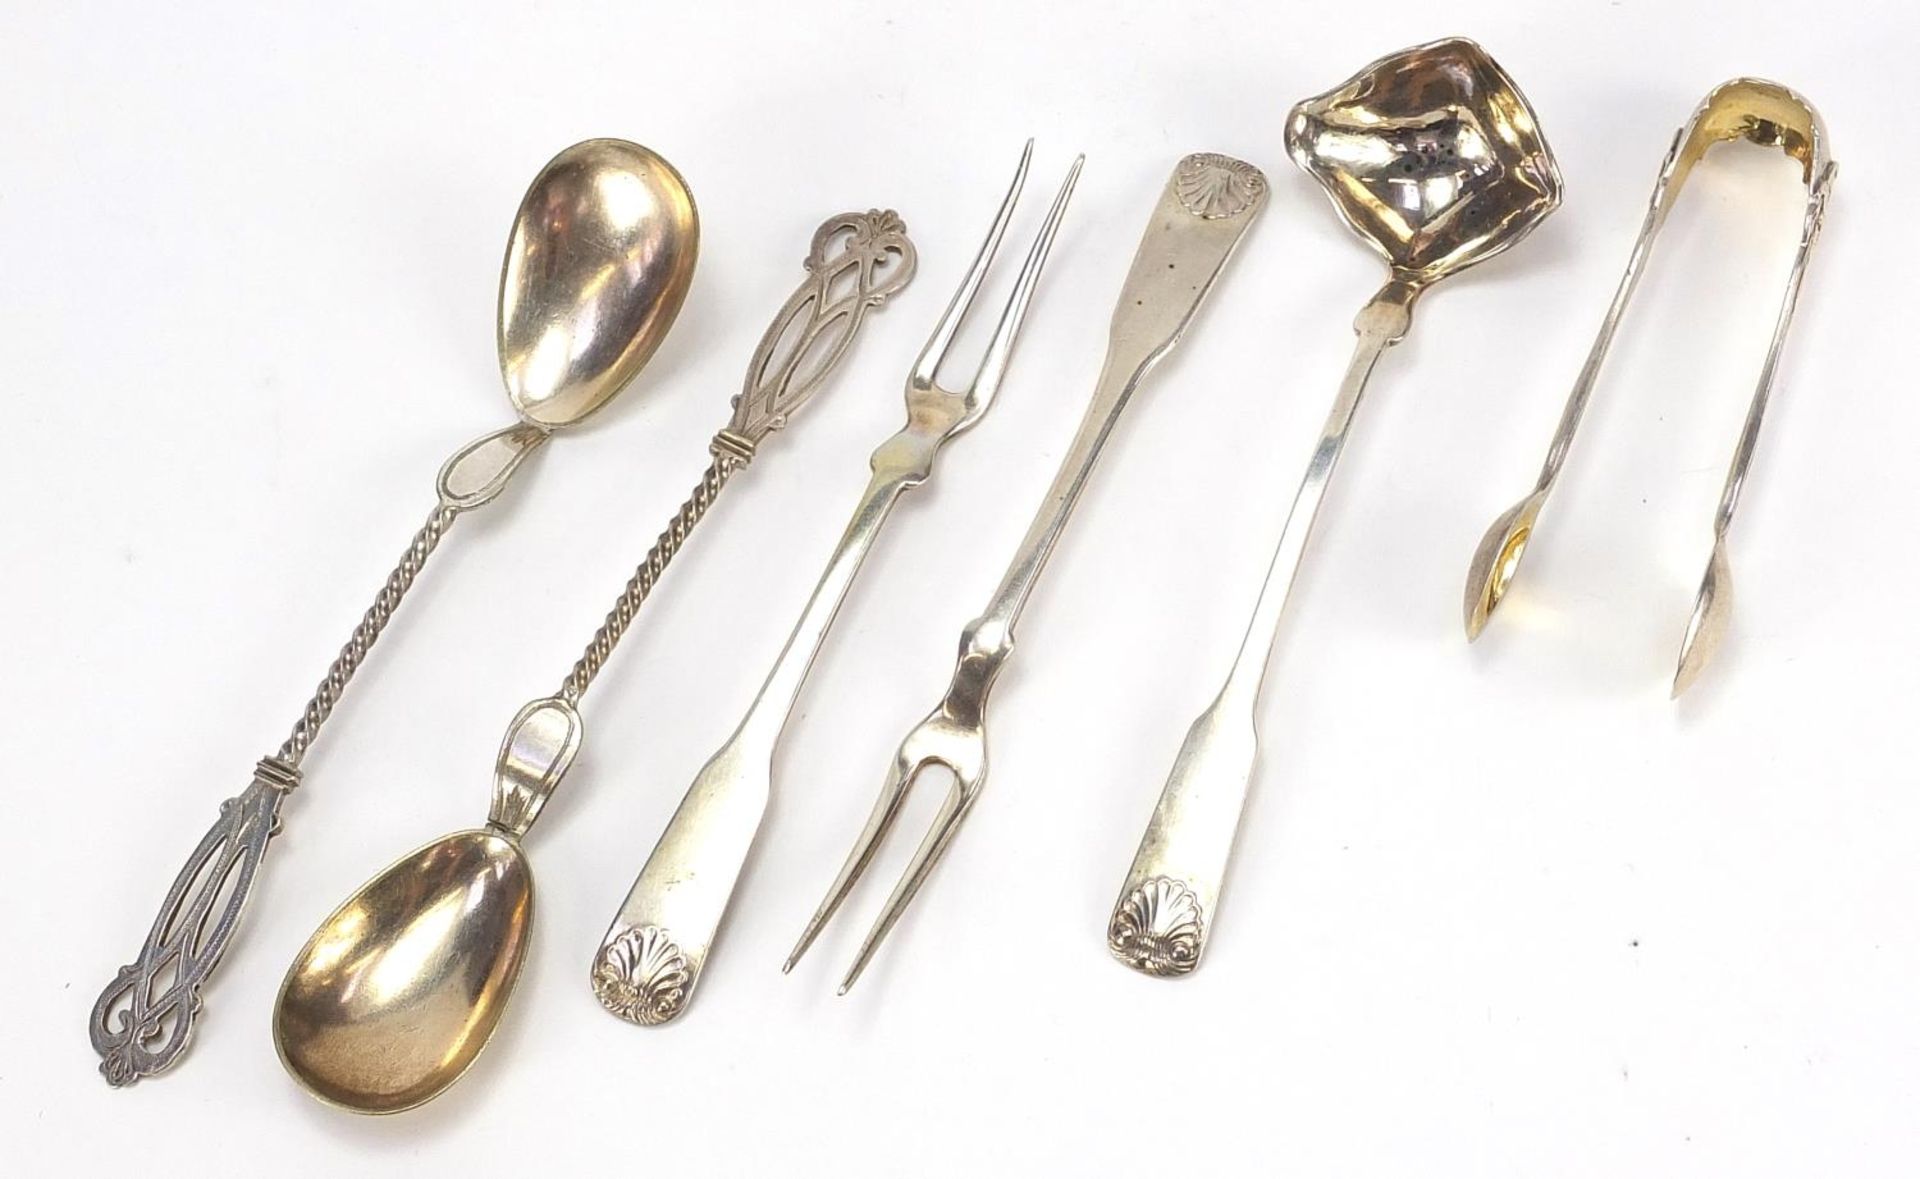 Danish silver and white metal cutlery including a toddy ladle, pair of forks and pair of sugar